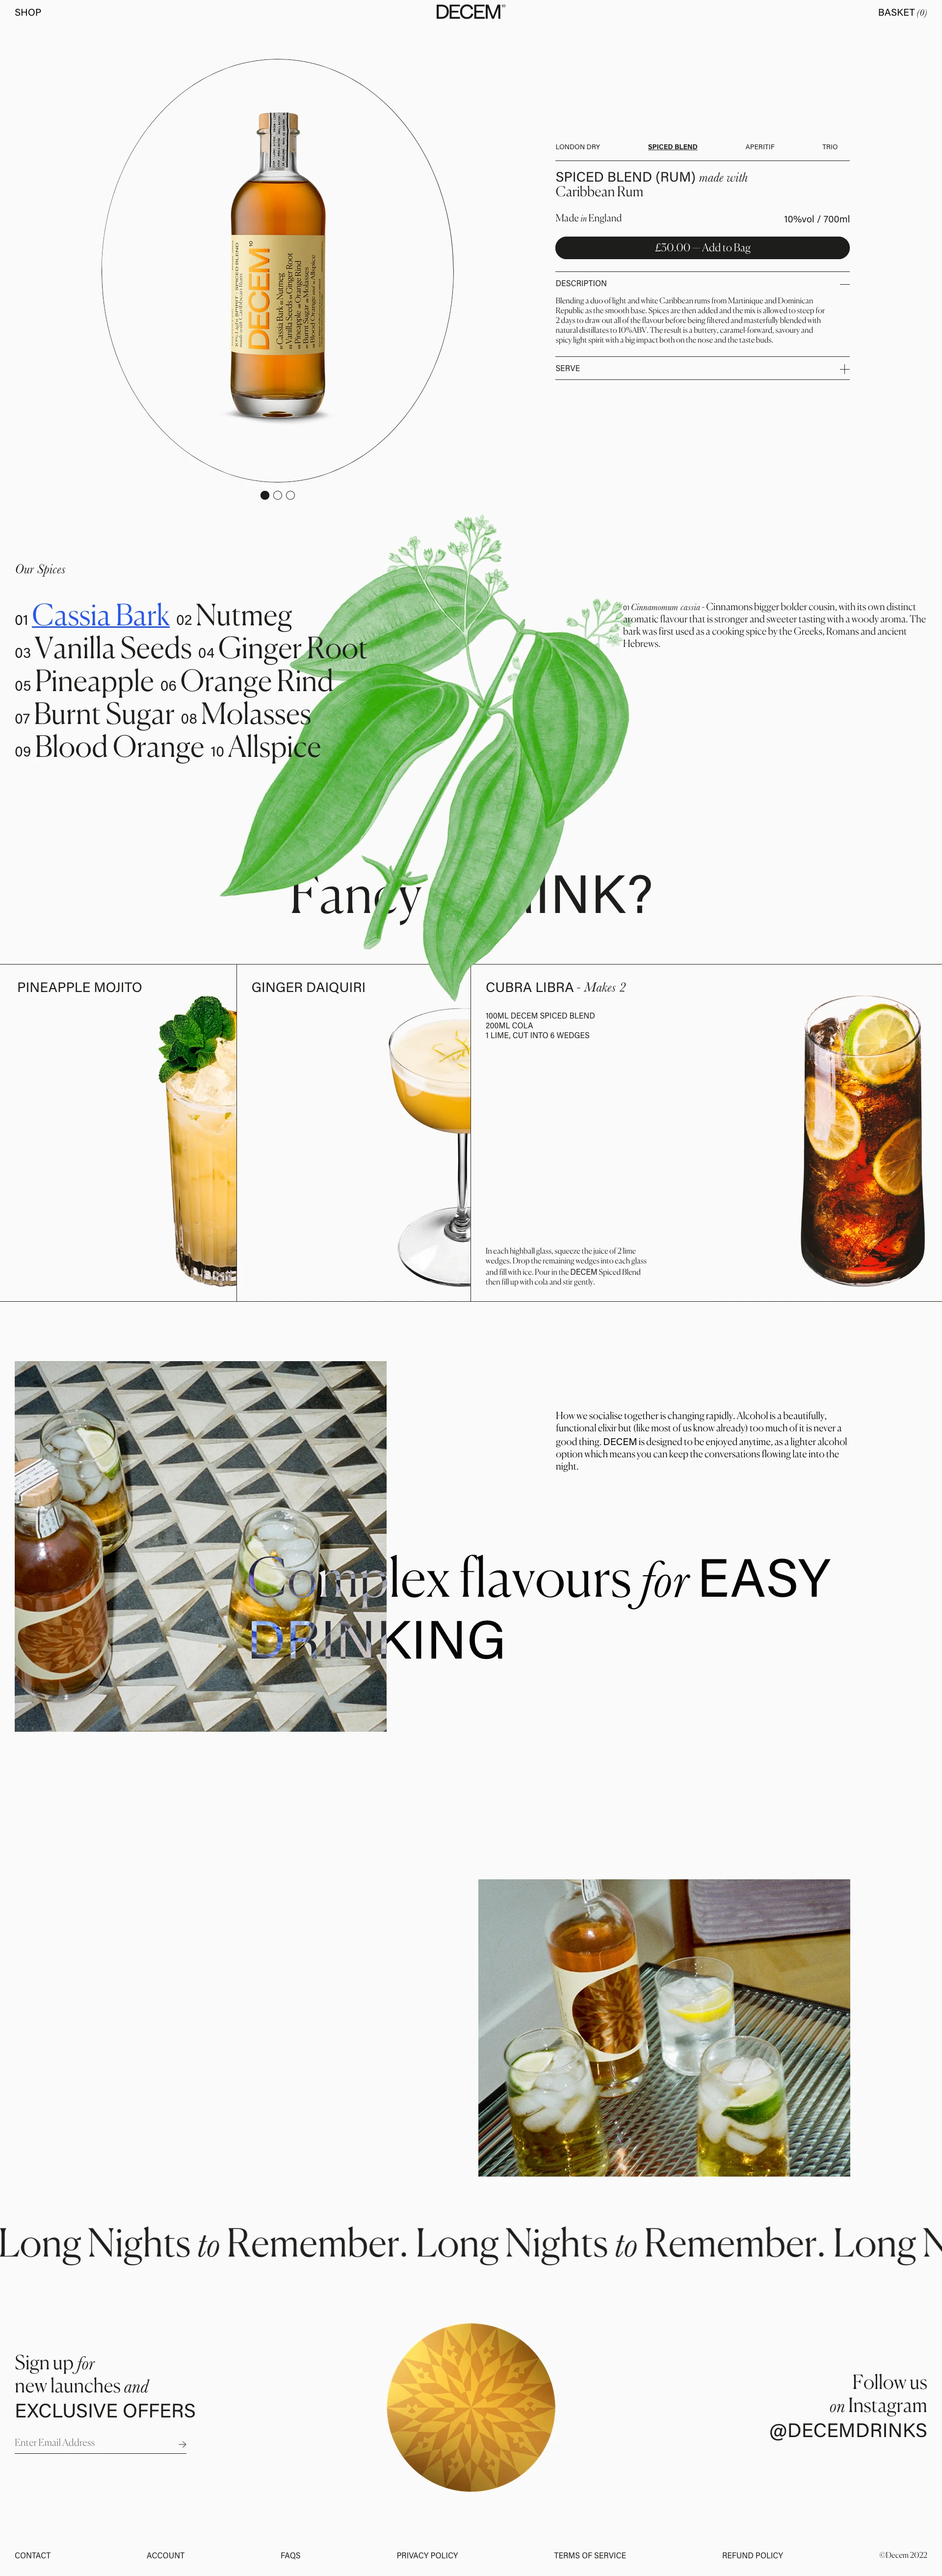 Decem Landing Page Example: A range of refreshingly NEW, 10% LIGHT SPIRITS made in England with natural ingredients.